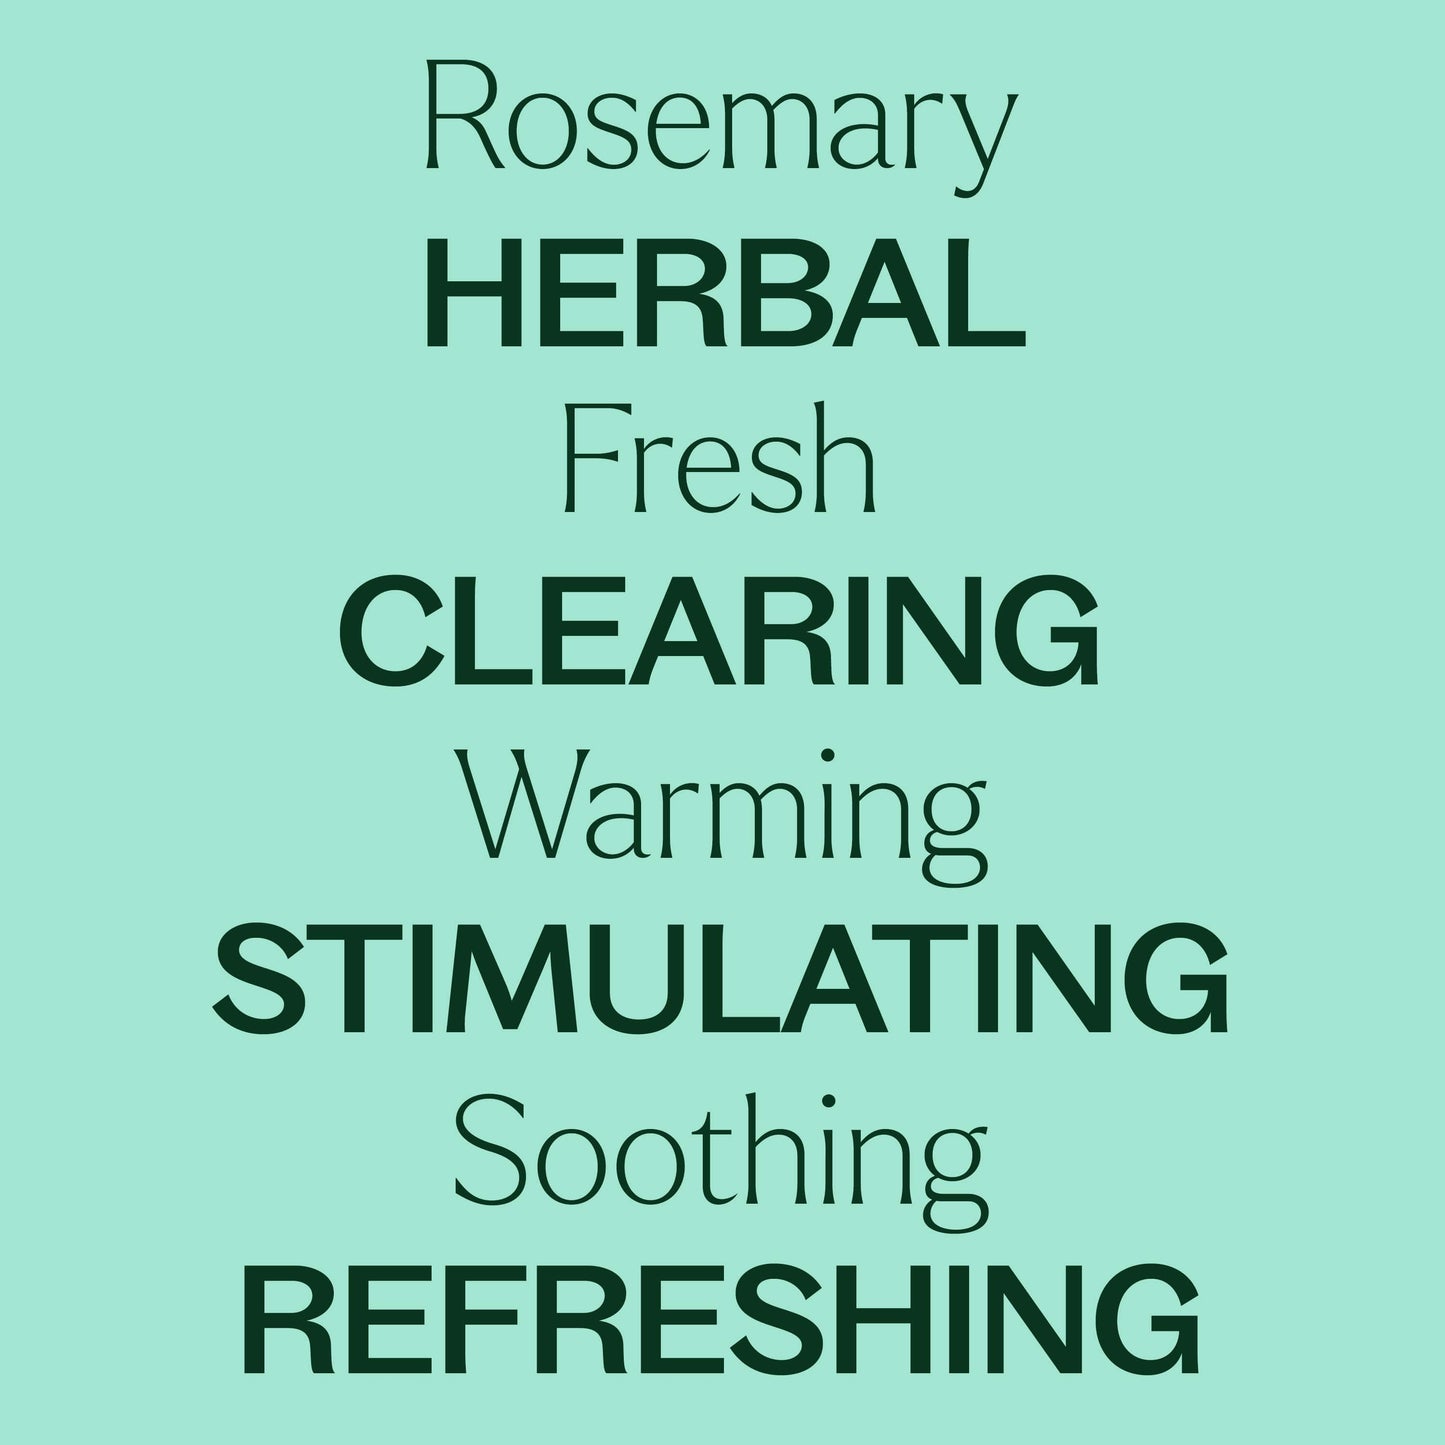 Organic Rosemary 1,8-Cineole Essential Oil is herbal, fresh, clearing, warming, stimulating, soothing and refreshing.